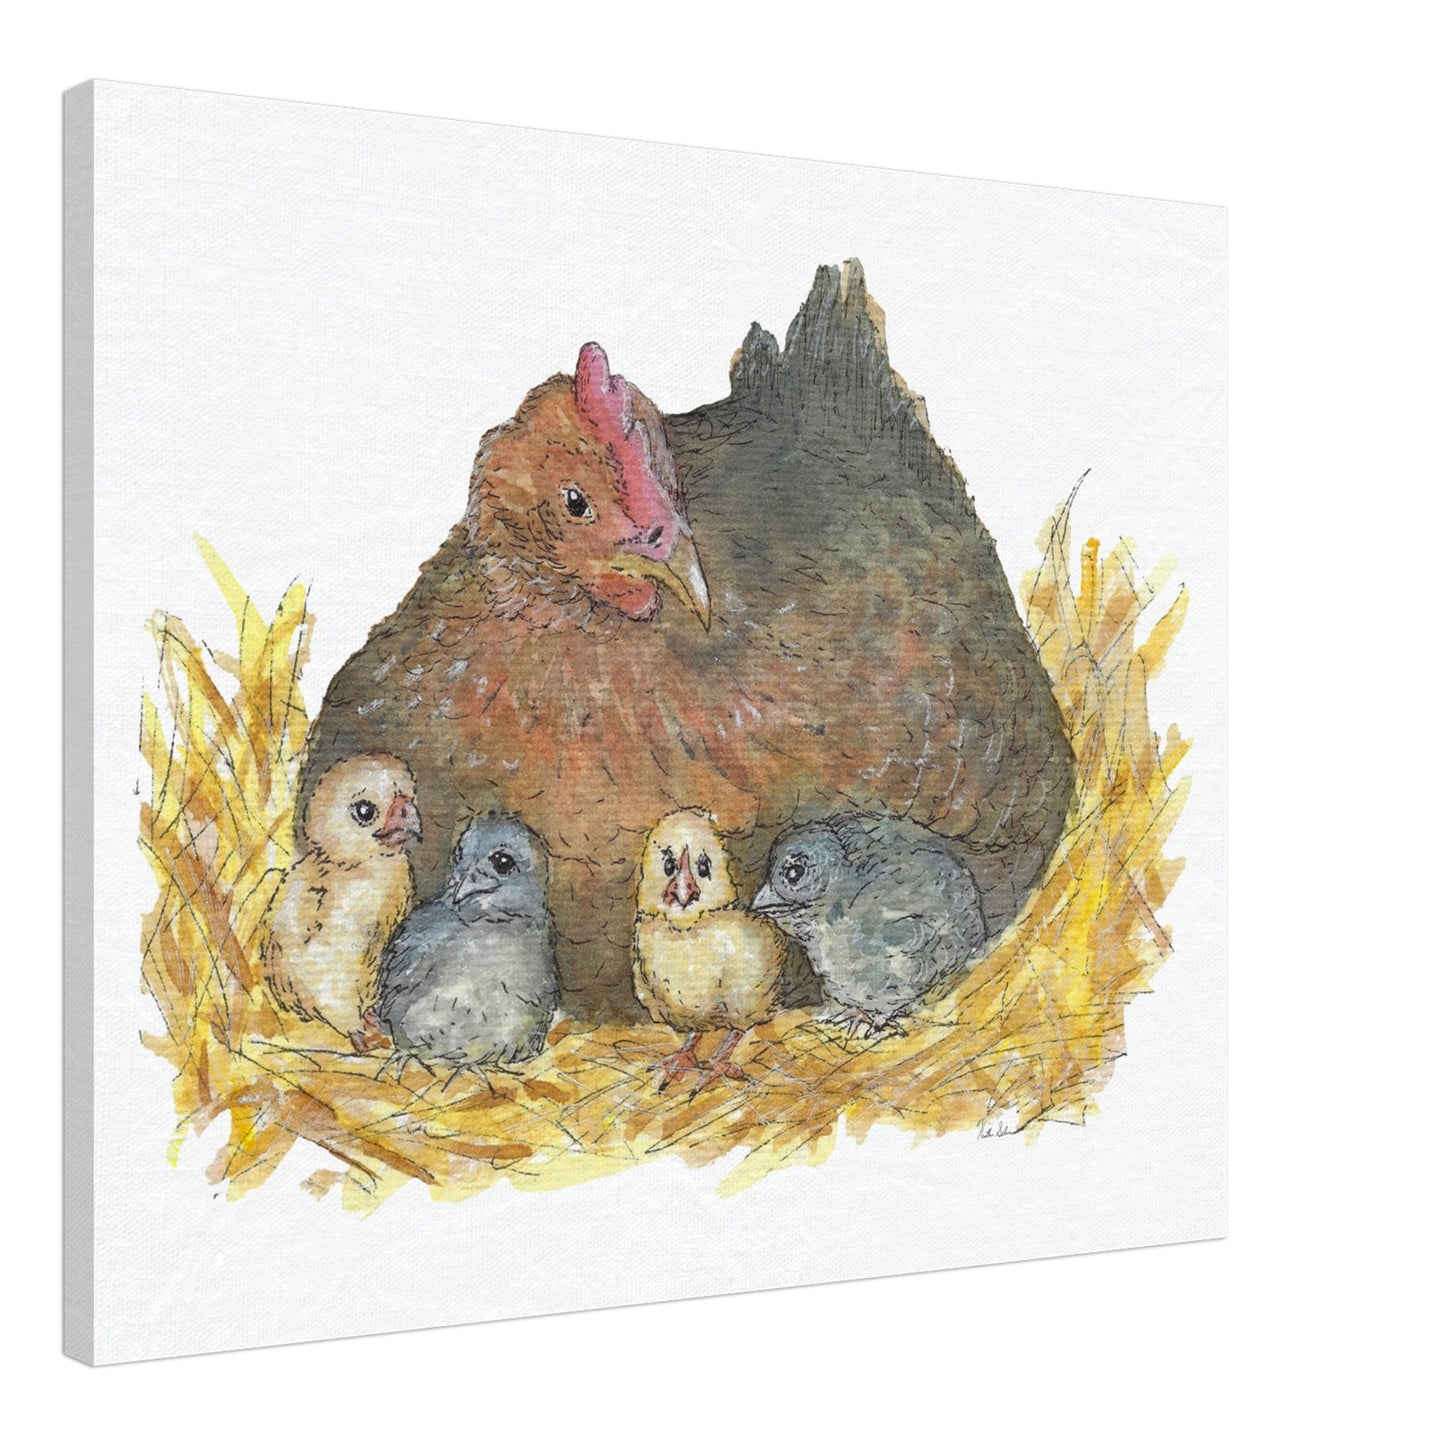 8 by 8 inch slim canvas Mother Hen print. Features a watercolor mother hen and her four chicks in a nest. Shown at an angle.